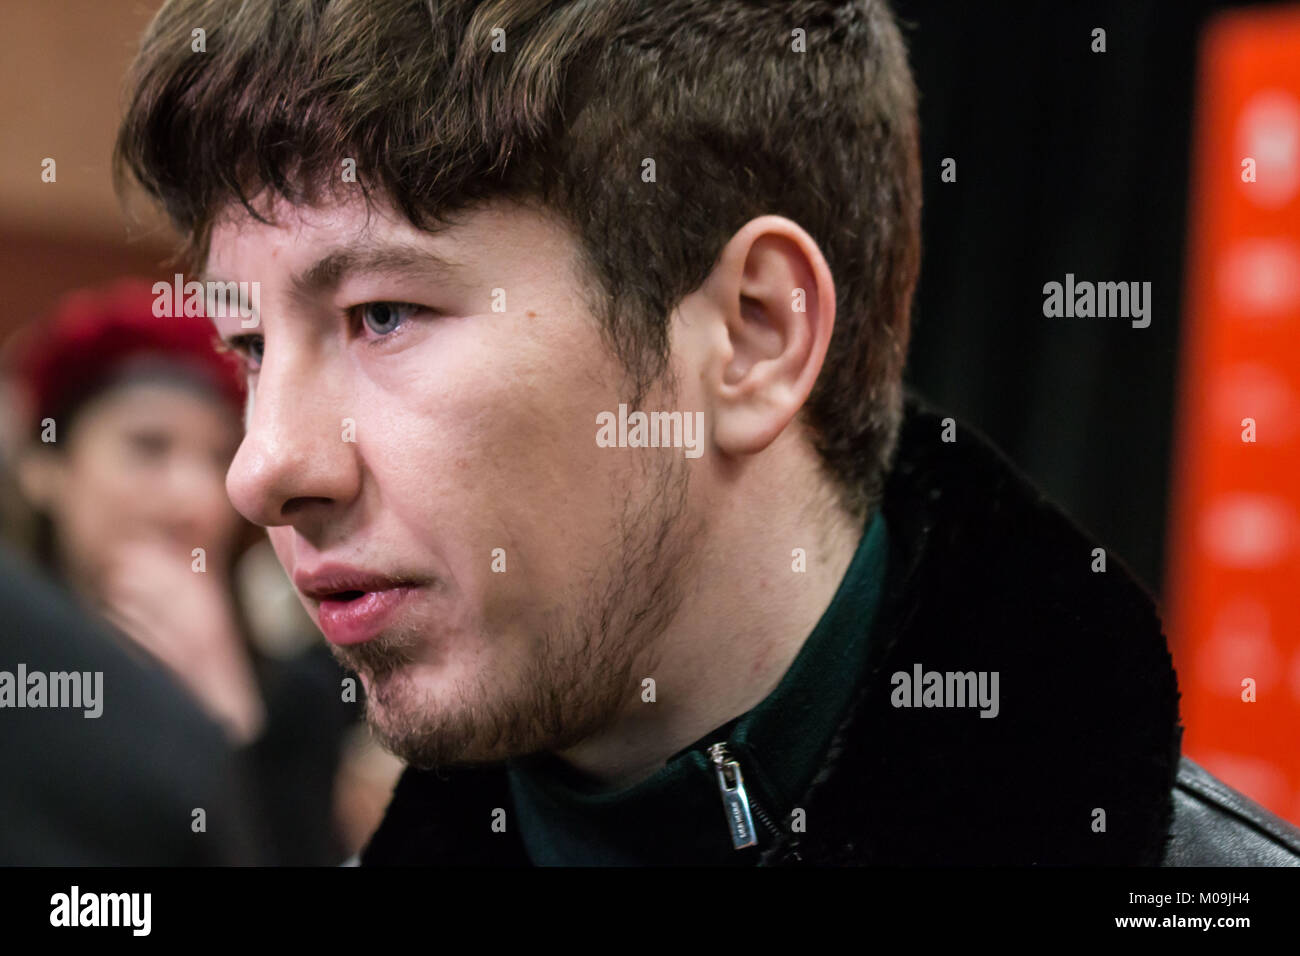 Actor Barry Keoghan attends the 'American Animals' Premiere during the 2018 Sundance Film Festival at Eccles Center Theatre on January 19, 2018 in Park City, Utah. Stock Photo